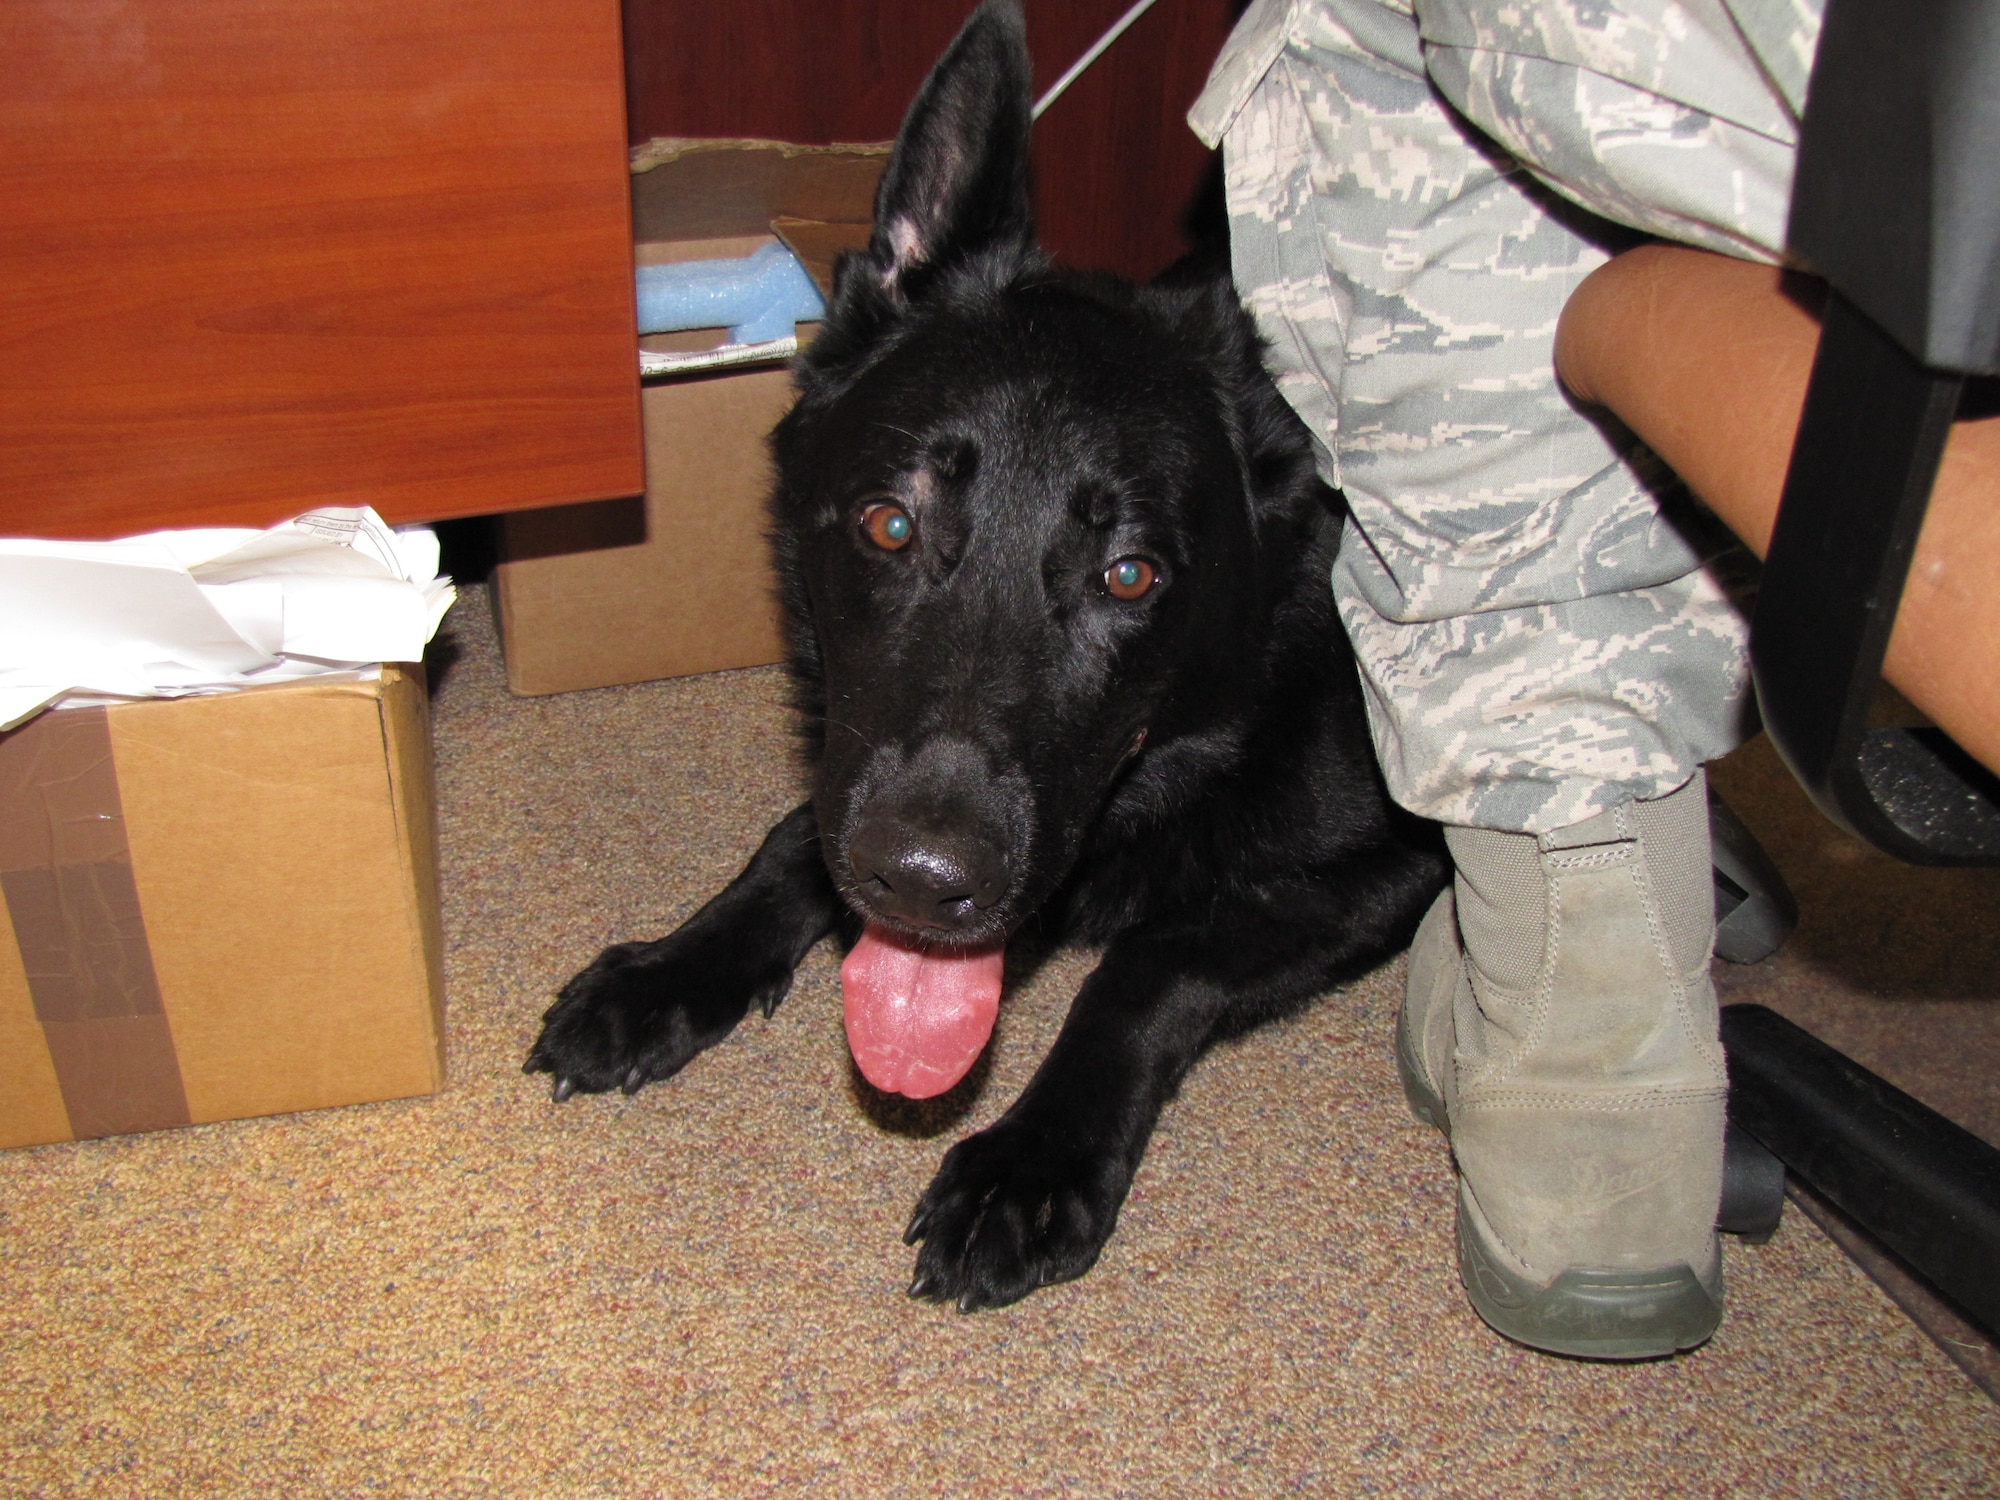 Back at the kennel at Maxwell Air Force Base, military working dog Blek, a 7-year-old German Sheppard, recuperates at the feet of Tech. Sgt. Ryan Veith, the 42nd Security Forces Squadron kennel master. Blek suffered permanent hearing loss as a result of the IED detonation and will be retired. (Courtesy photo)